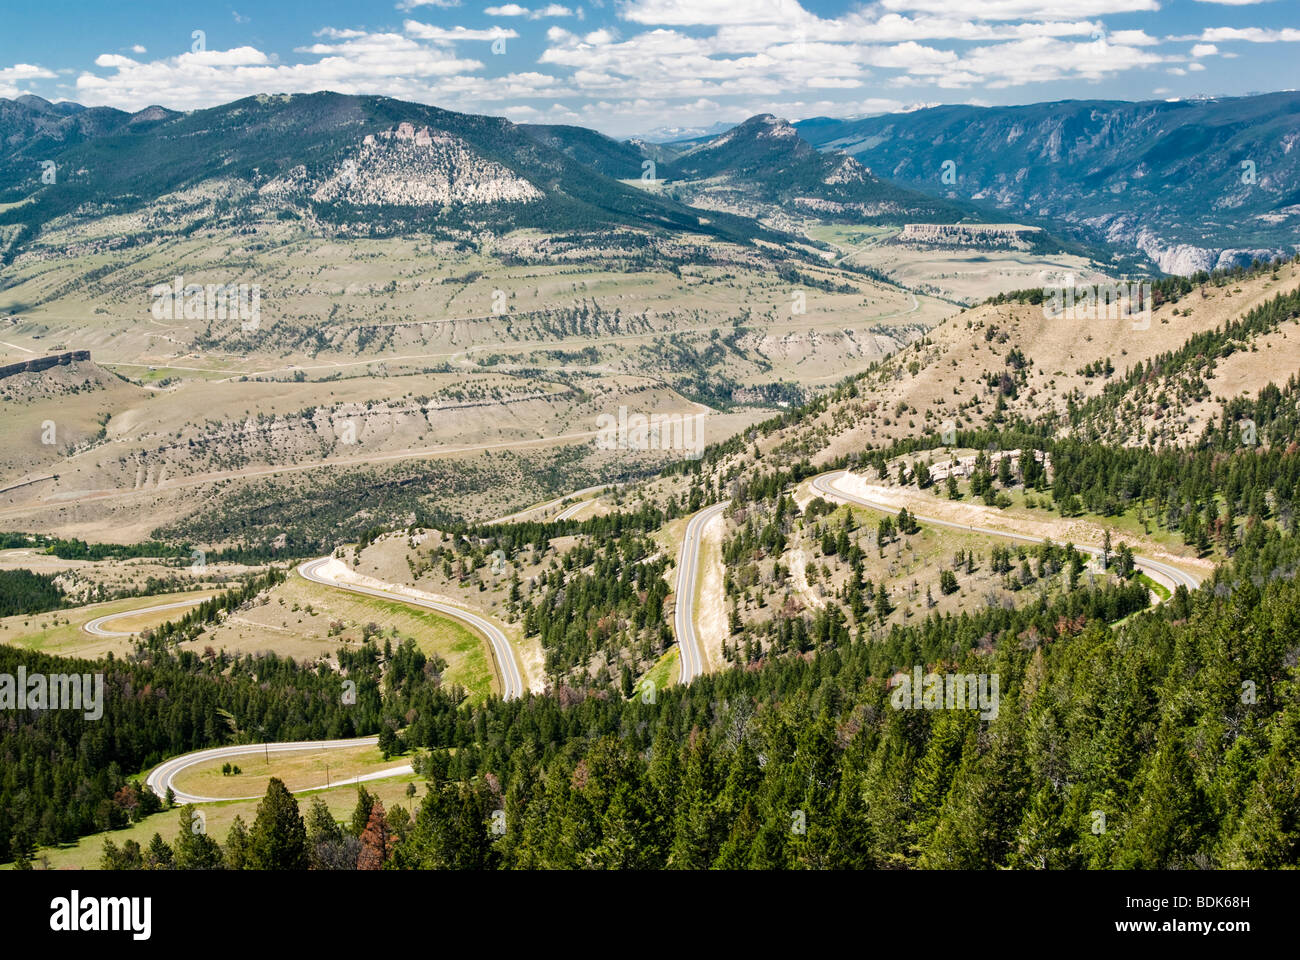 View of the mountains along Chief Joseph Scenic Byway in Wyoming. Stock Photo